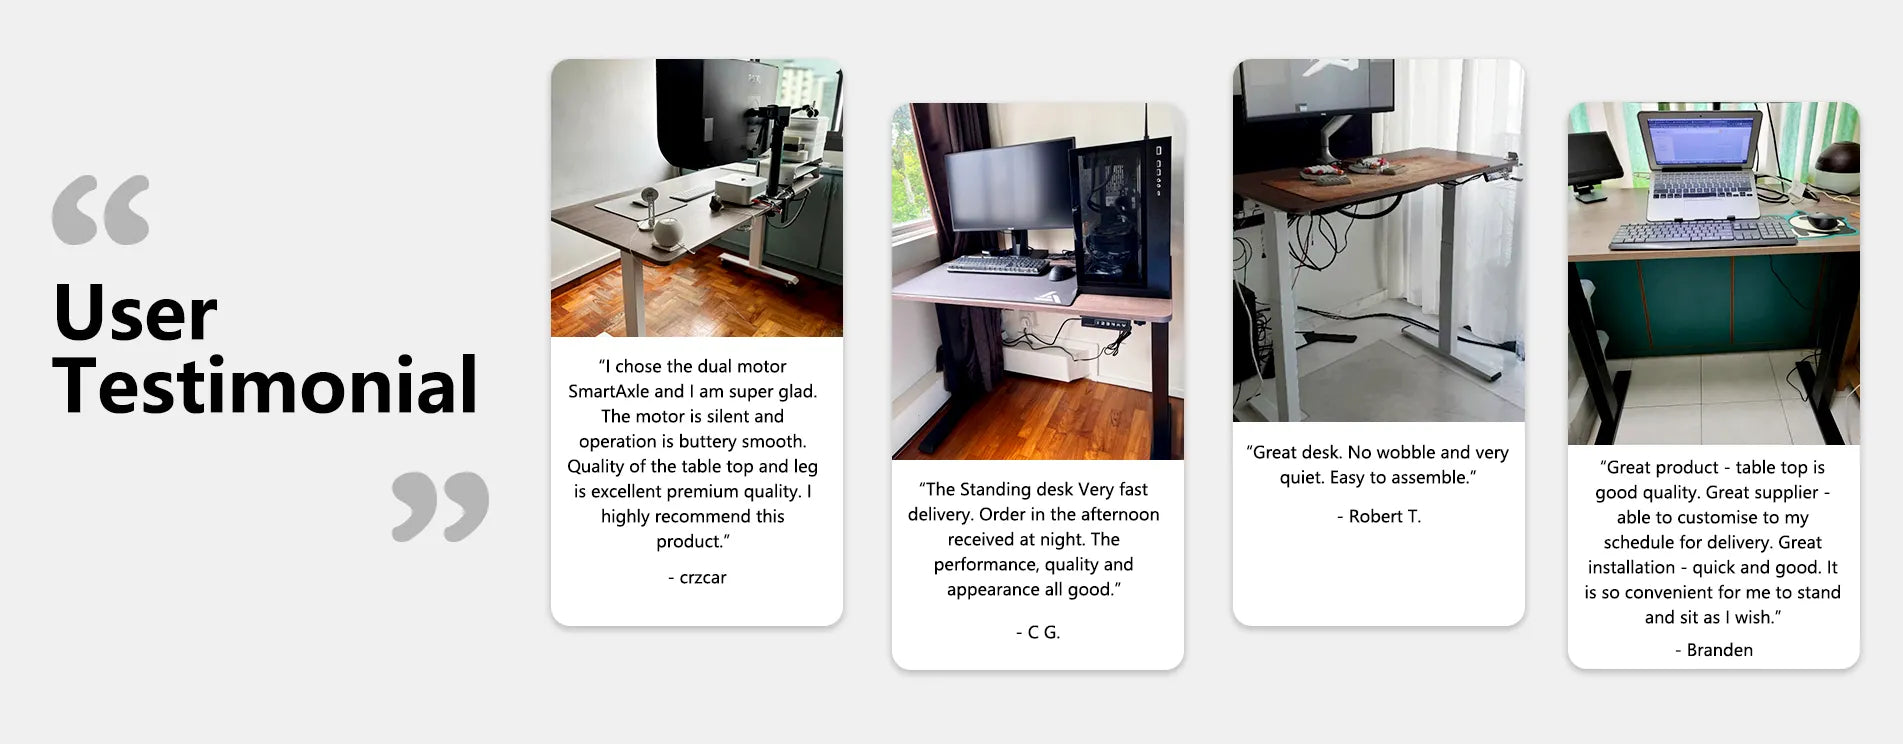 Compilation of Flujo standing desk reviews, praising its silent dual motor, smooth operation, fast delivery, and customization options for optimal work convenience